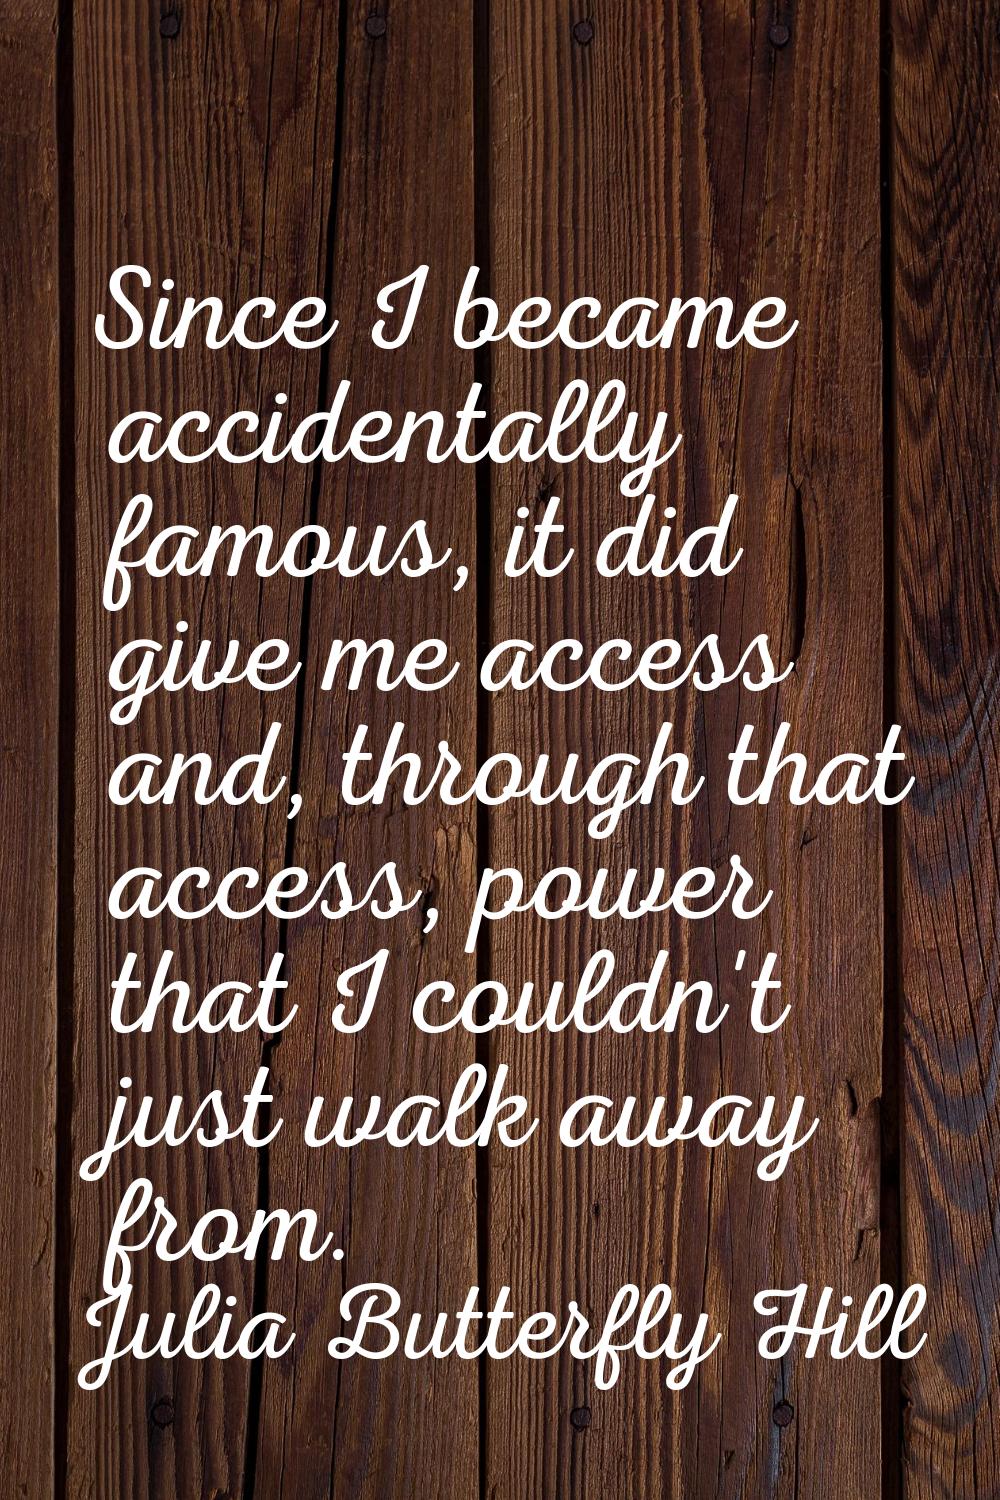 Since I became accidentally famous, it did give me access and, through that access, power that I co